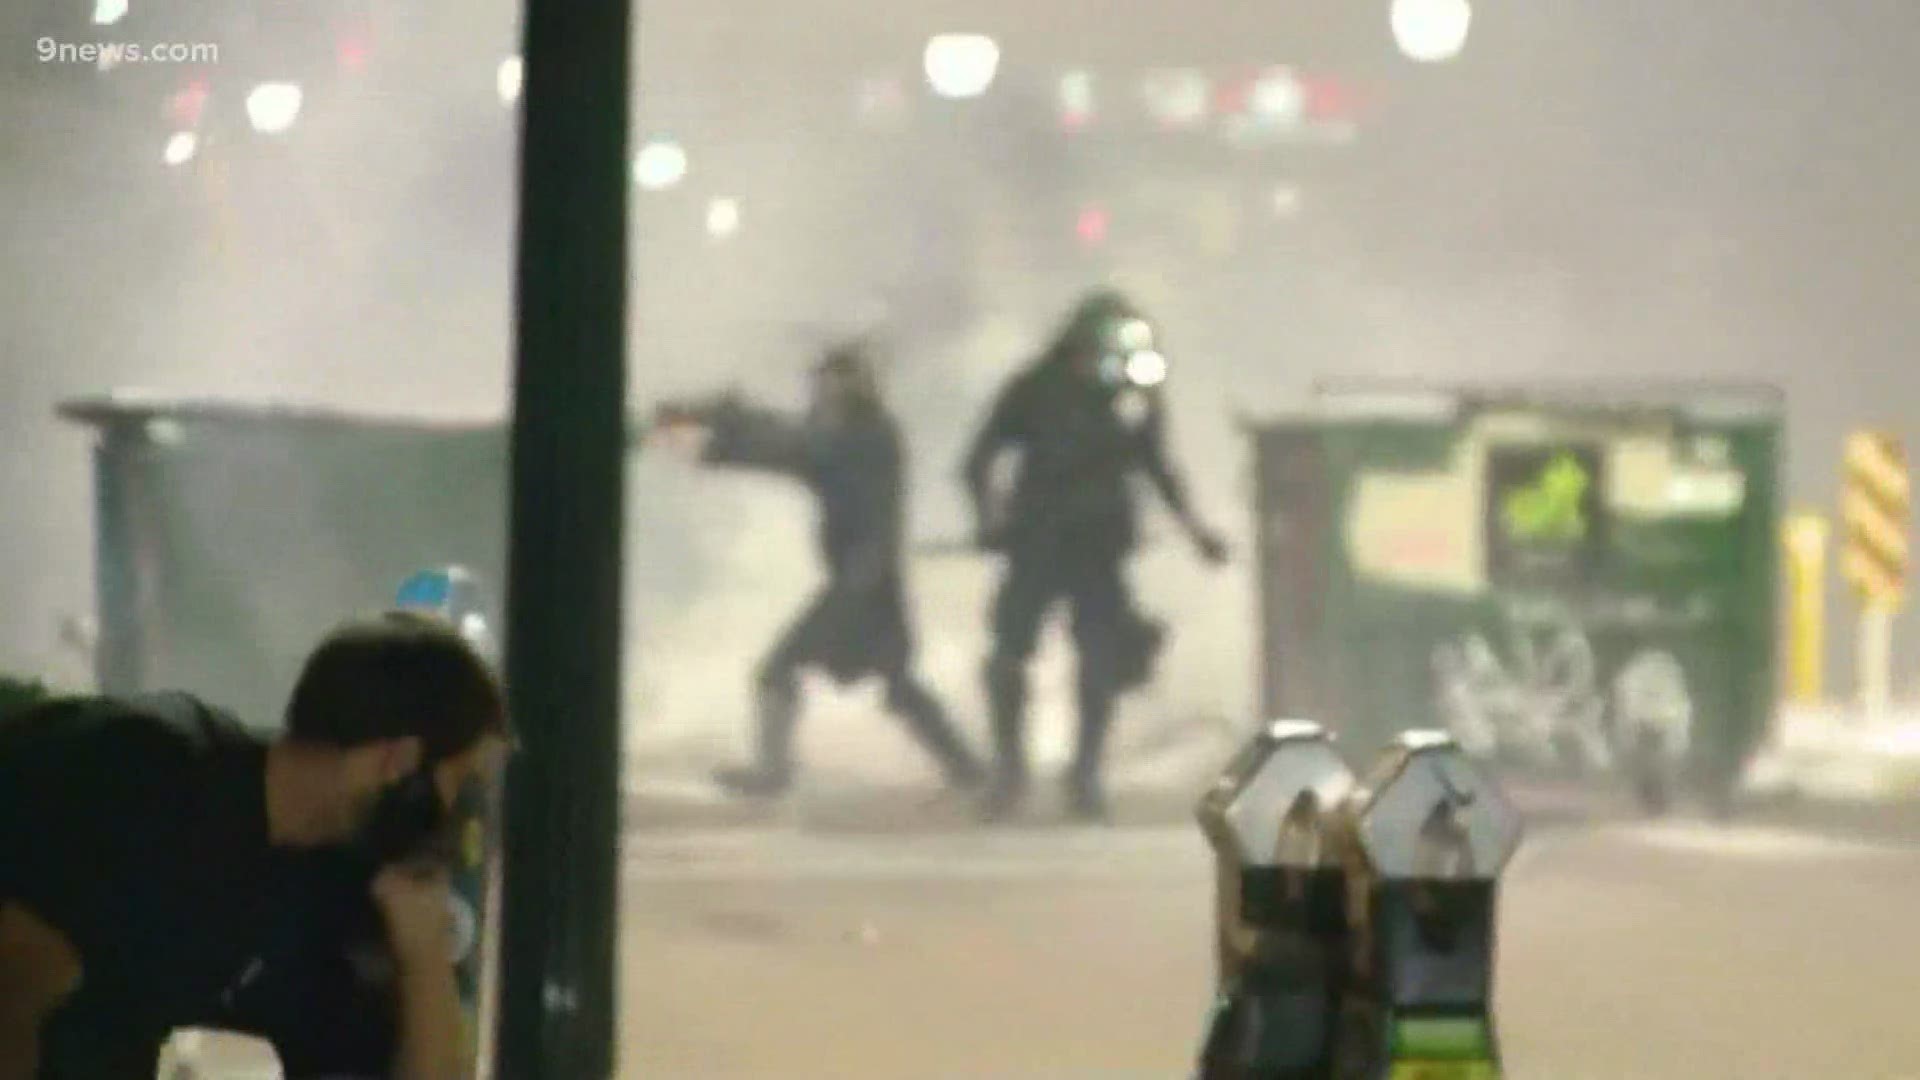 Officers used tear gas and rubber bullets in an effort to disperse George Floyd protesters.